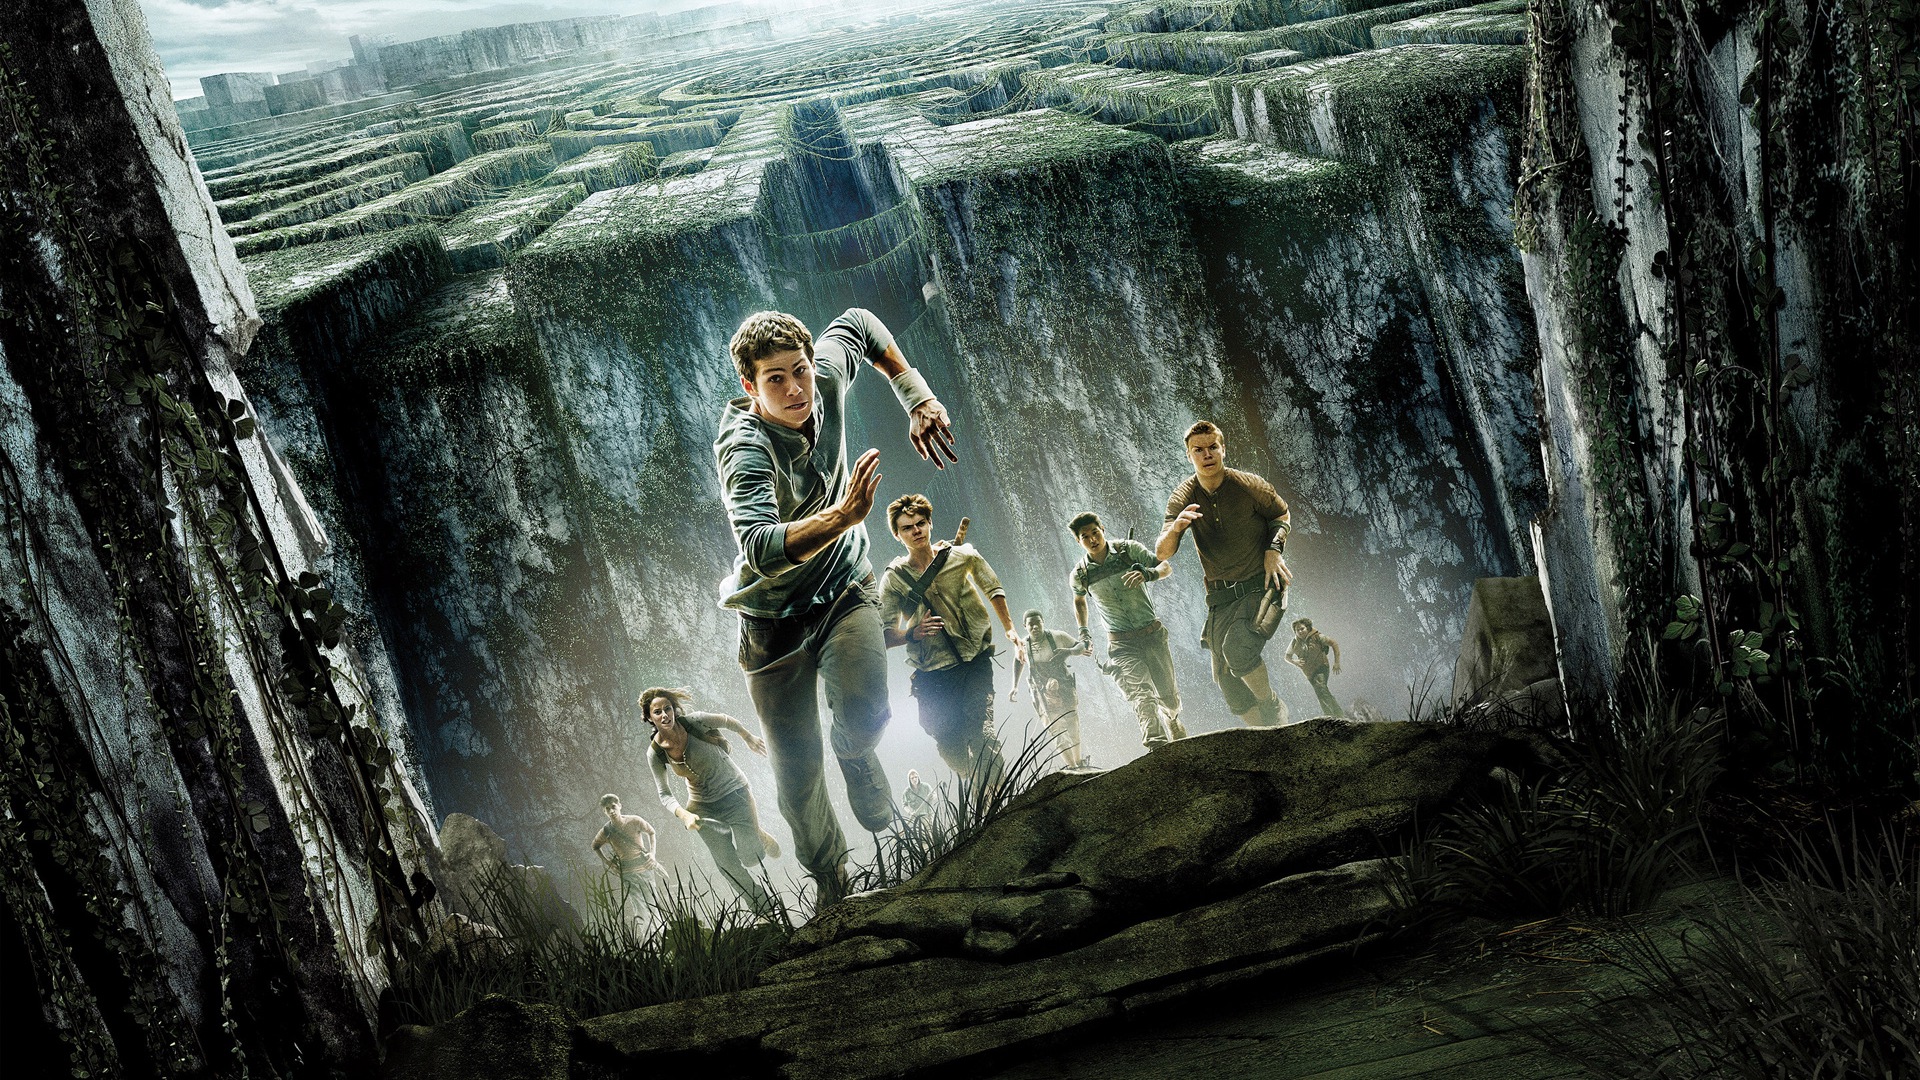 The Maze Runner HD movie wallpapers #6 - 1920x1080